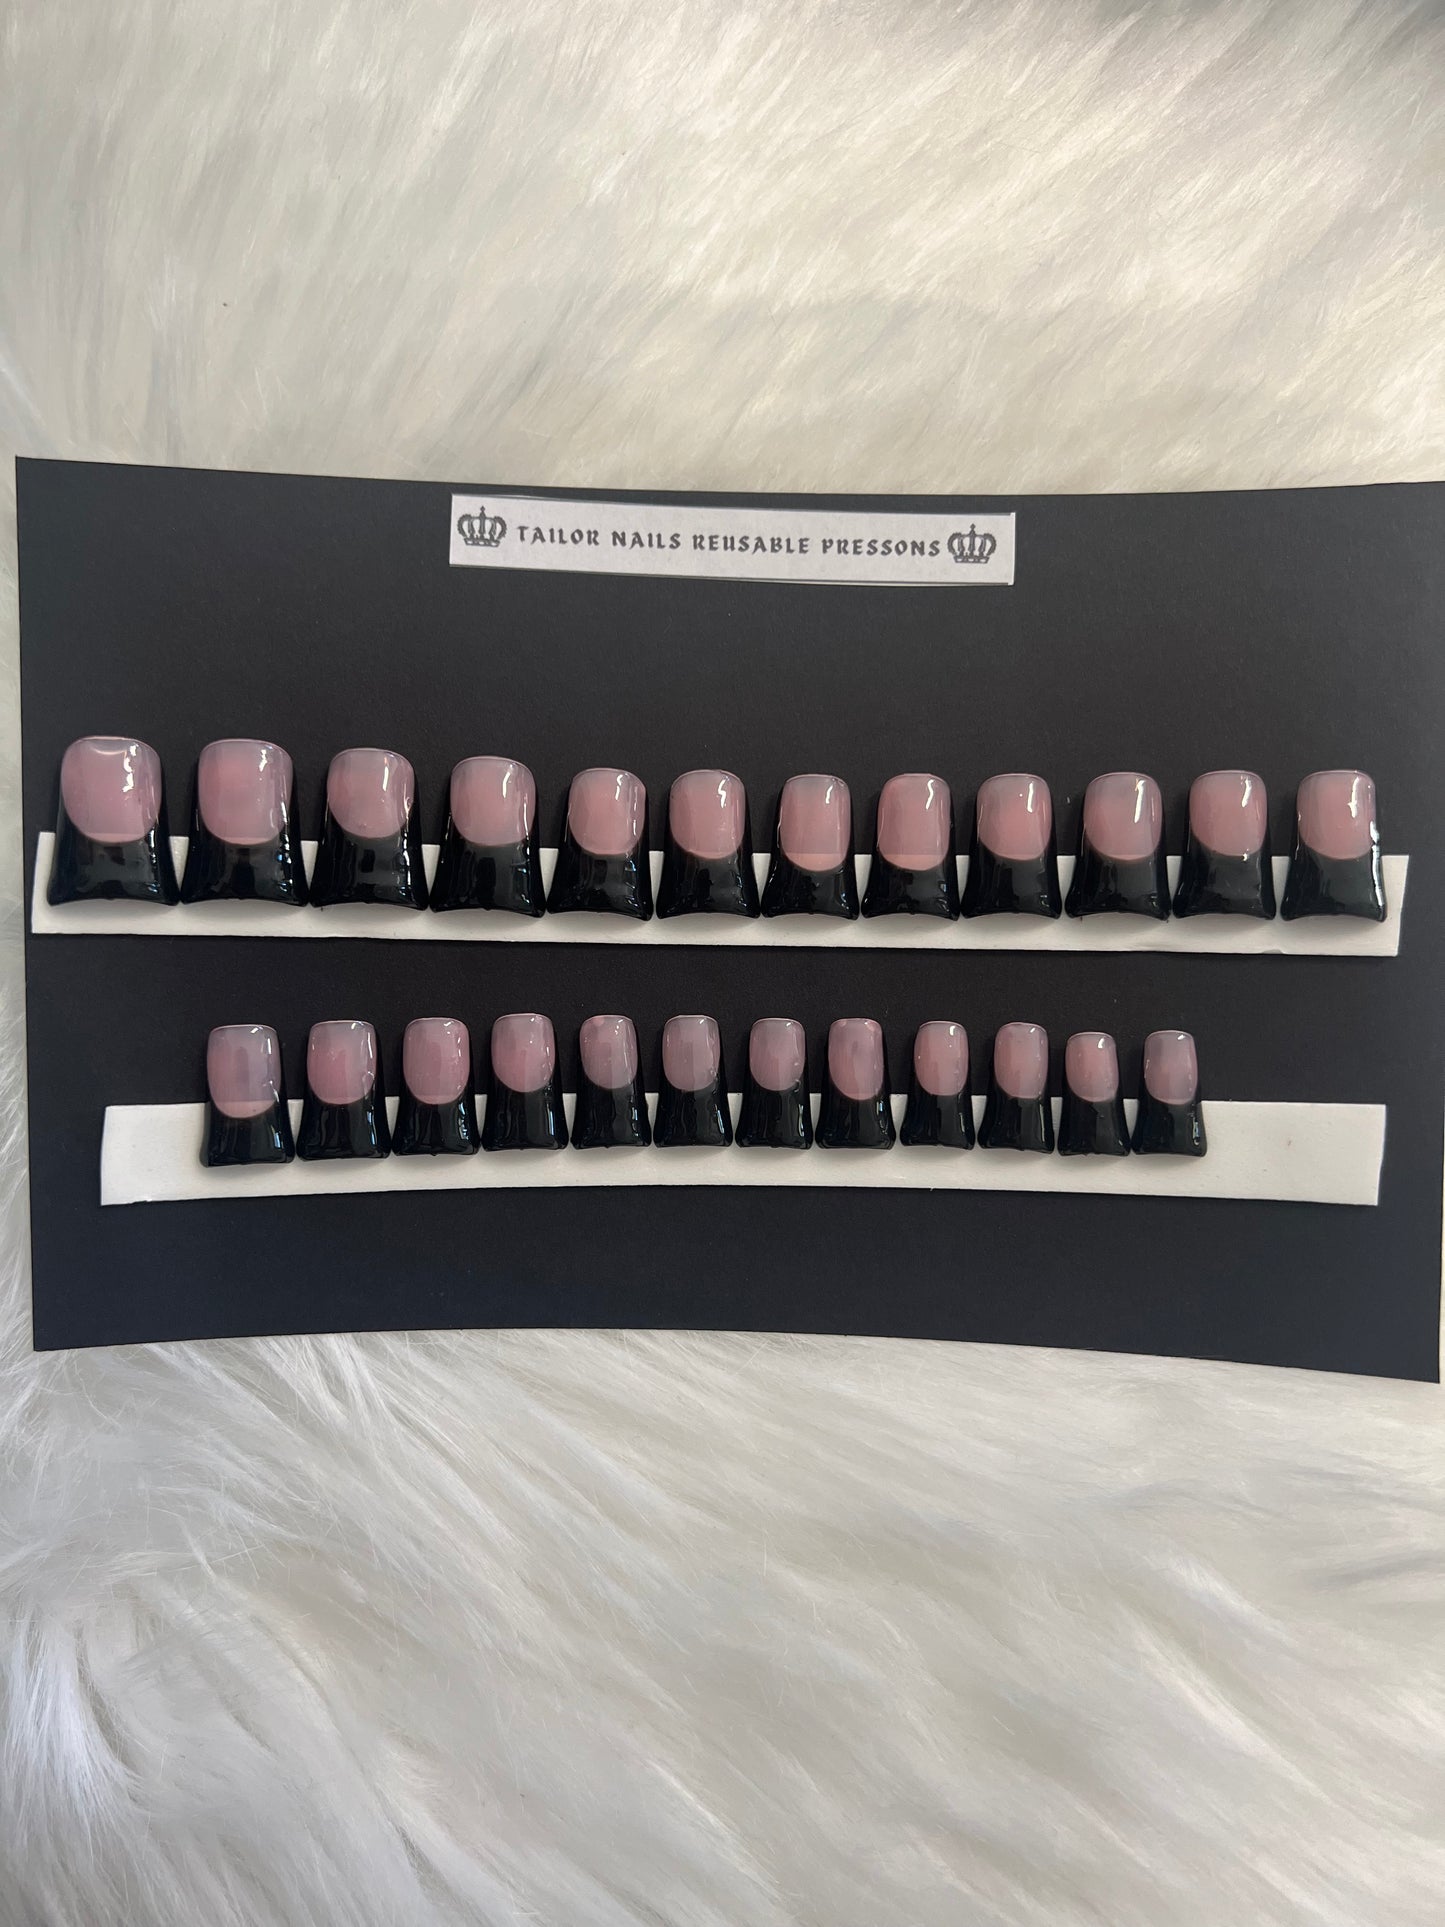 Black French Tip Duckies (Short length) 24 piece set